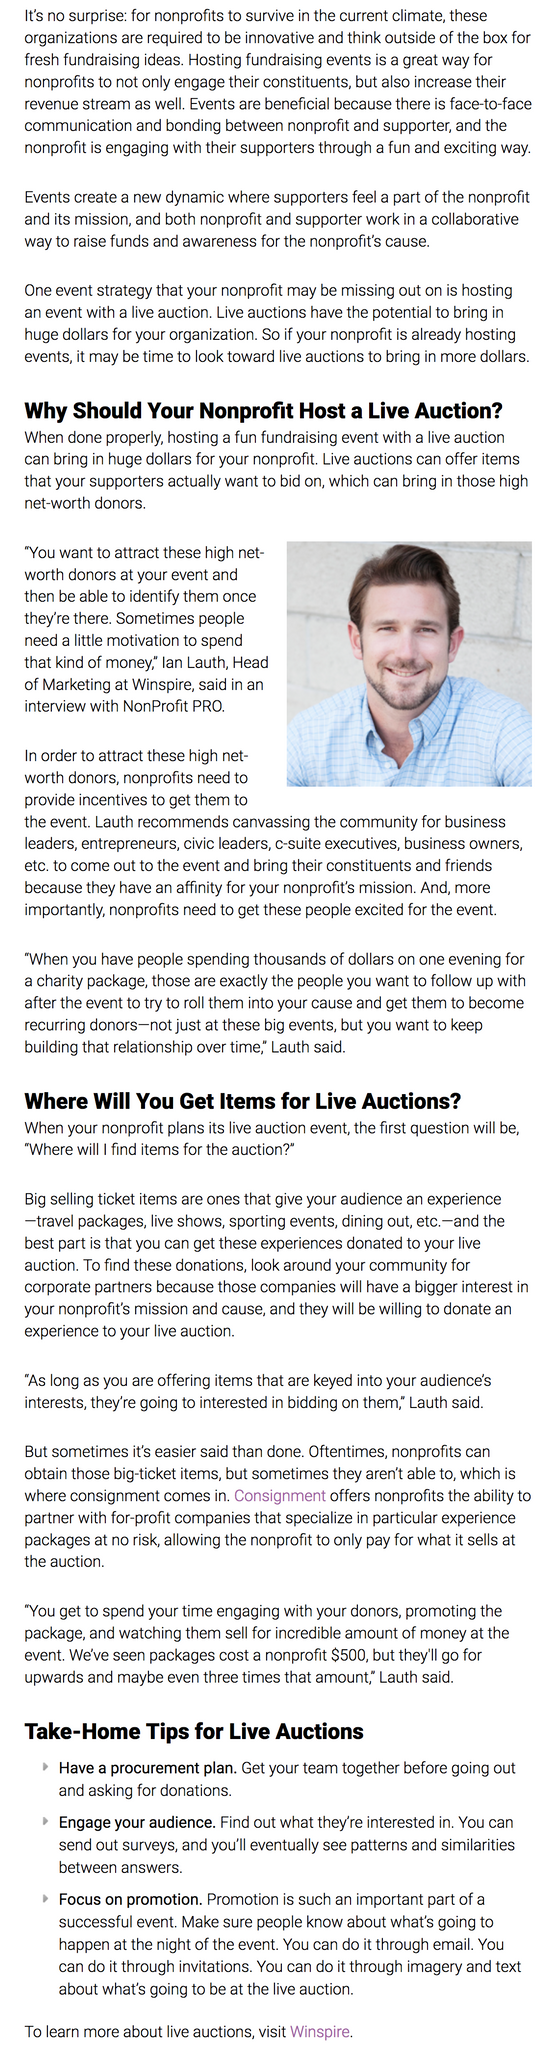 Use Winspire to add unique live auction items and experiences to your event